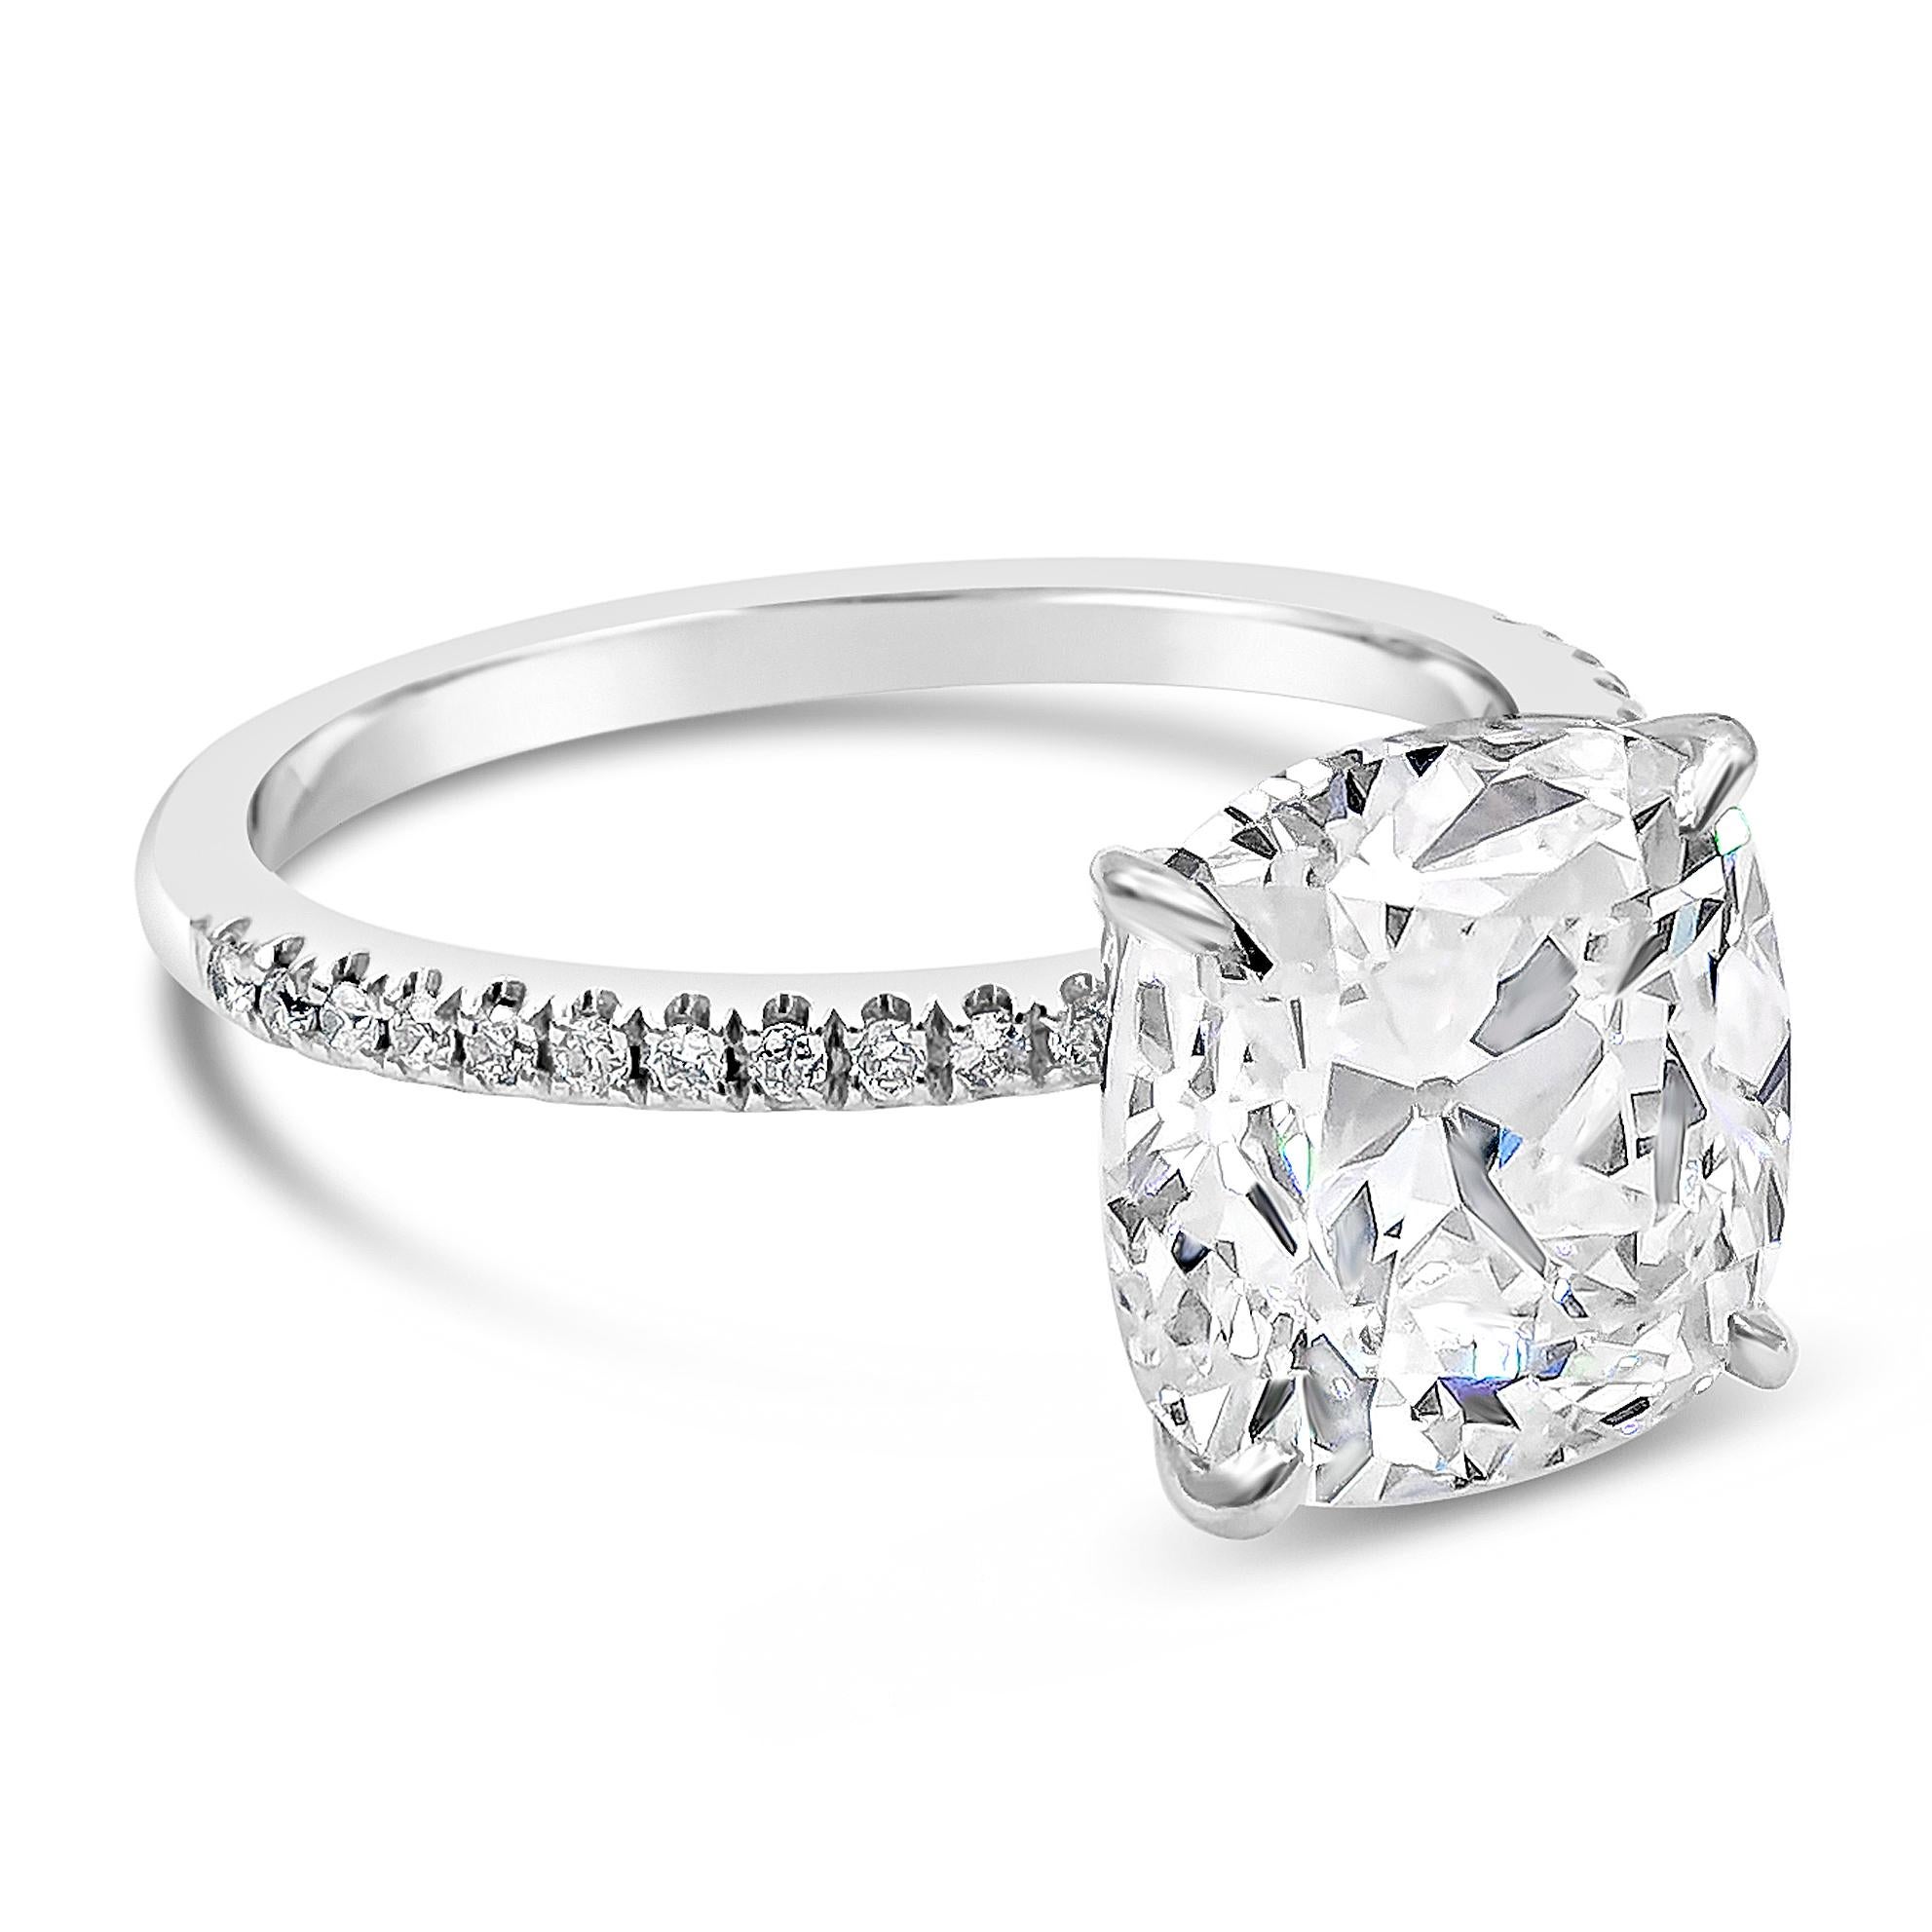 A classic engagement ring style showcasing a 4.68 carats cushion cut diamond center stone certified by GIA as K color and VS2 in clarity. Set in a very thin, platinum band accented with diamonds and Finely made in 14K white gold and platinum.

Roman